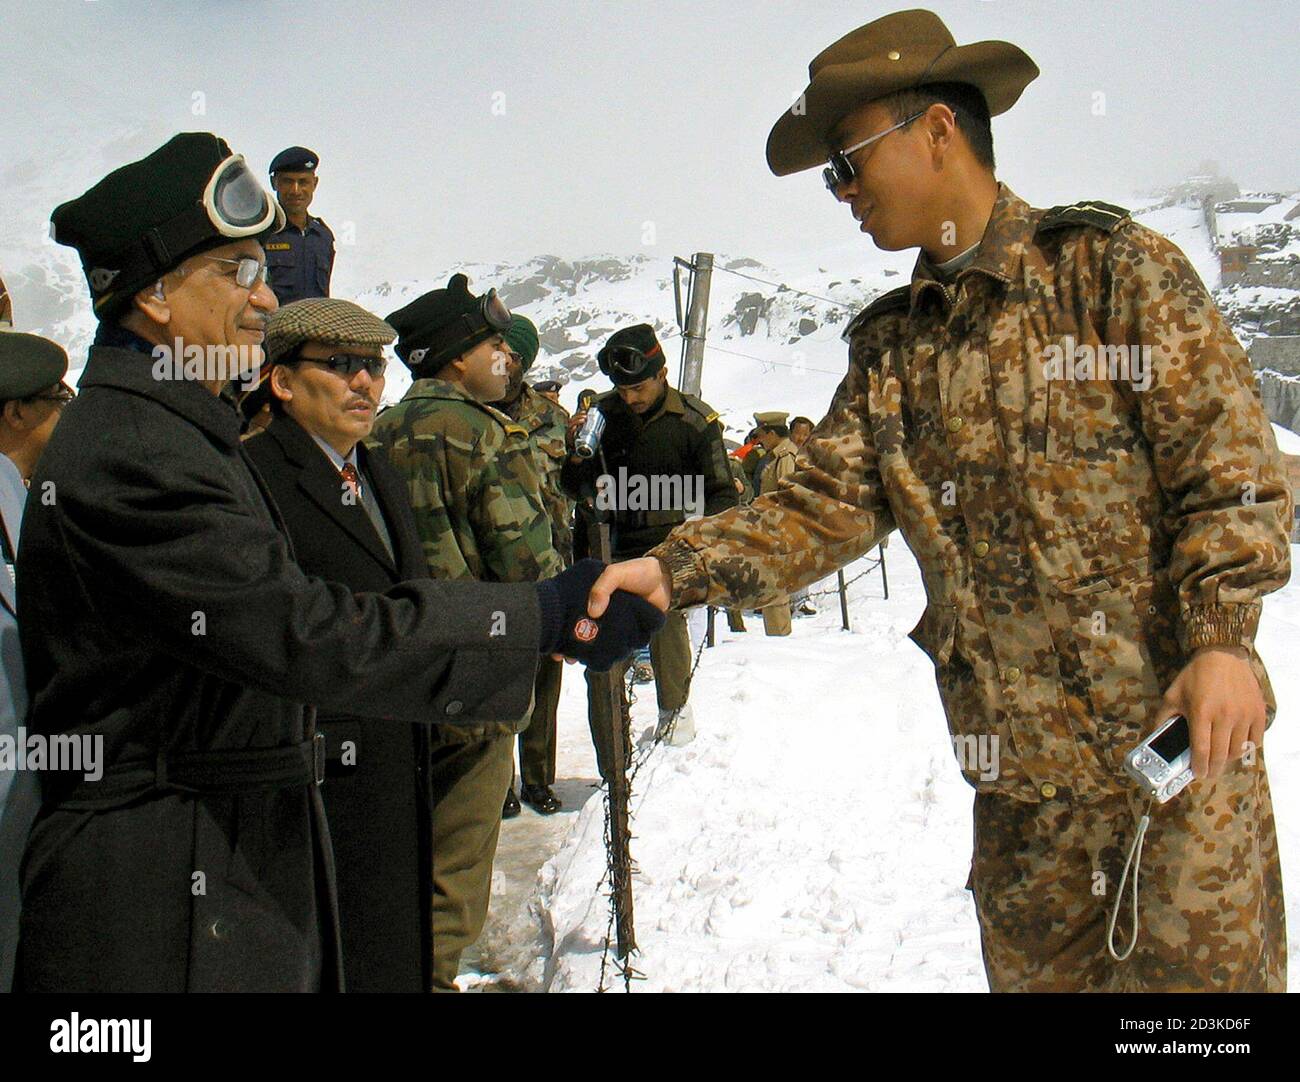 India's Home Minister Patil shakes hands with Chinese army officer during visit to Indo-China border at Nathula in India's Sikkim state.  India's Home Minister Shivraj Patil (L) shakes hands with a Chinese army officer during his visit to the Indo-China border in Nathula in Sikkim state, 175 km (109 miles) from the northeastern Indian city of Siliguri April 4, 2005. A longstanding boundary dispute between China and India will be on the agenda when Chinese Premier Wen Jiabao visits New Delhi this week. REUTERS/Rupak De Chowdhuri Stock Photo